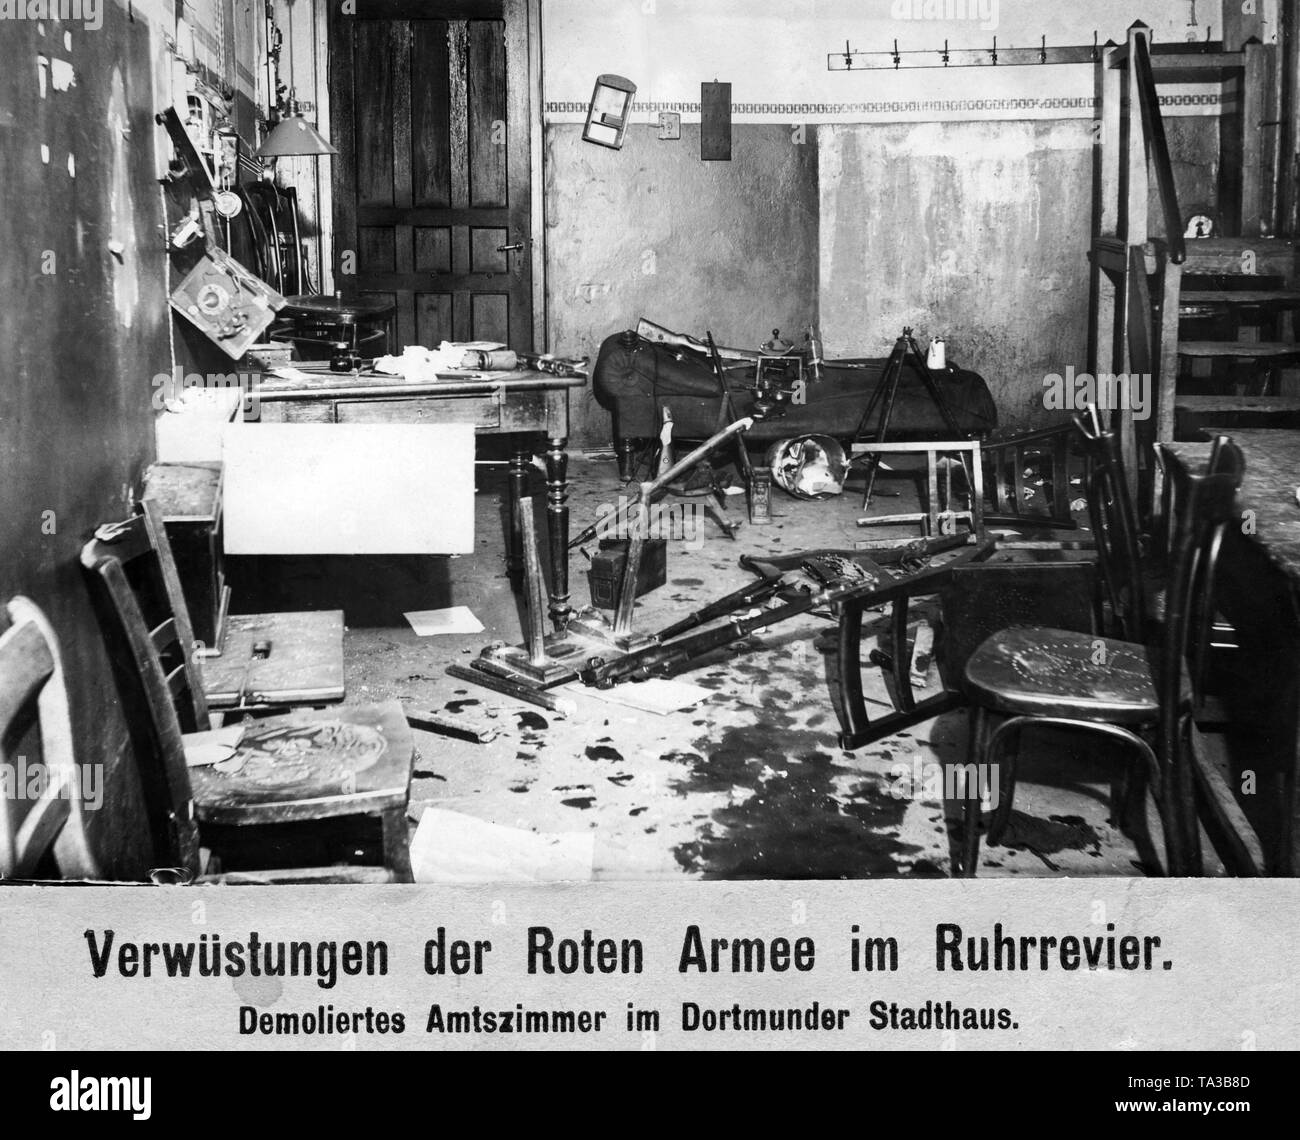 Two days after the beginning of the Kapp Putsch, a Communist uprising broke out in the Ruhr area. Armed workers take over the power in the Ruhr area. The Freikorps, which intervened on the government's order, is repulsed and suffers heavy losses. It was first on the 2nd of April, when the Reichswehr intervened, when the Red Army had to withdraw. After bloody battles the Reichswehr managed to restore the old order by the 10th of May. This photograph shows one of the numerous office rooms in the Dortmund Town Hall, devastated during the withdrawal of the Red Army. Stock Photo